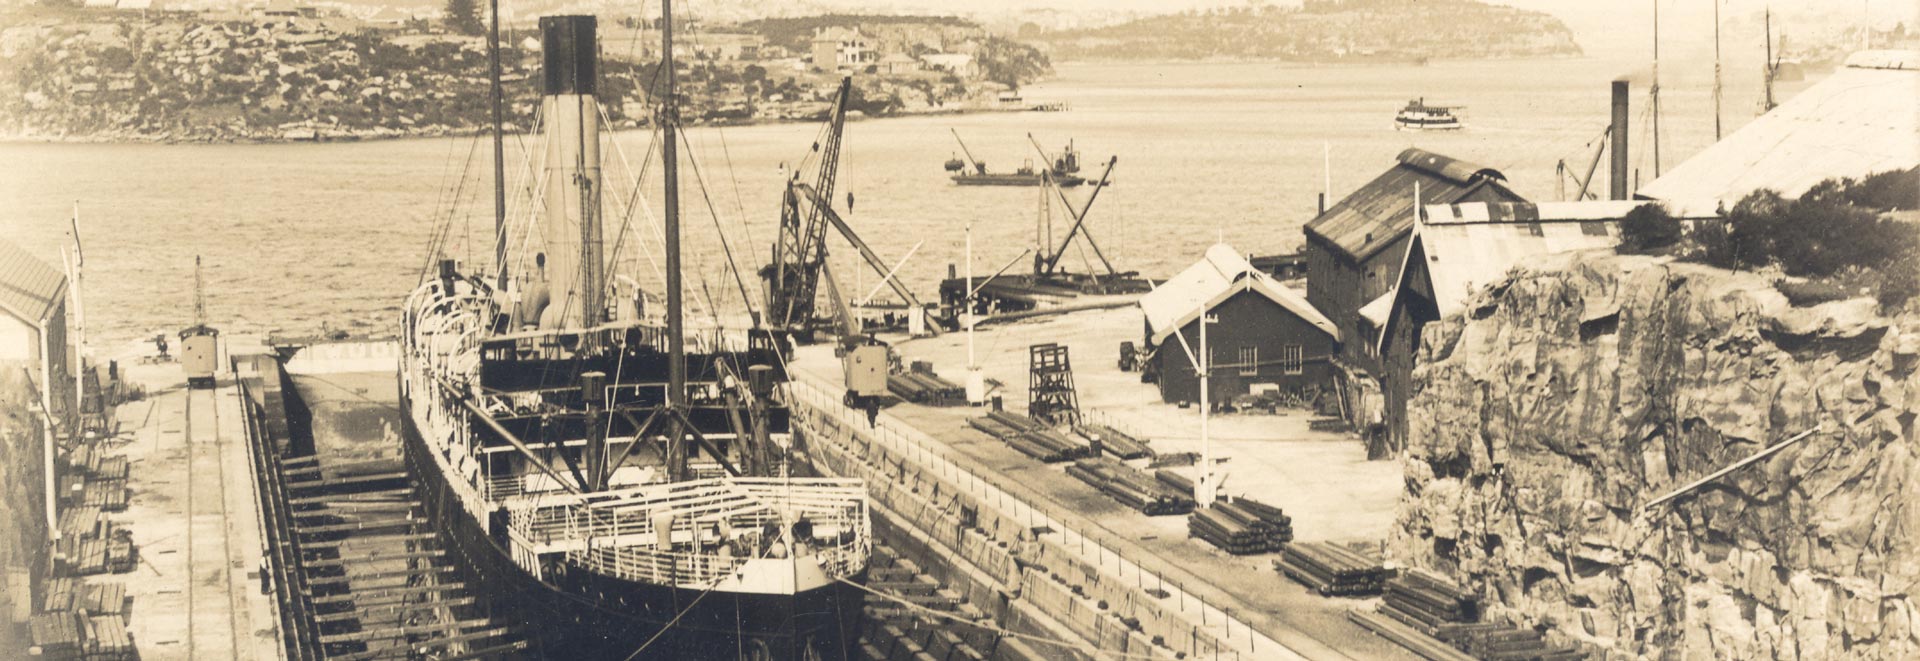 Sonoma Woolwich Dock Hunters Hill Sydney Harbour 1920X660